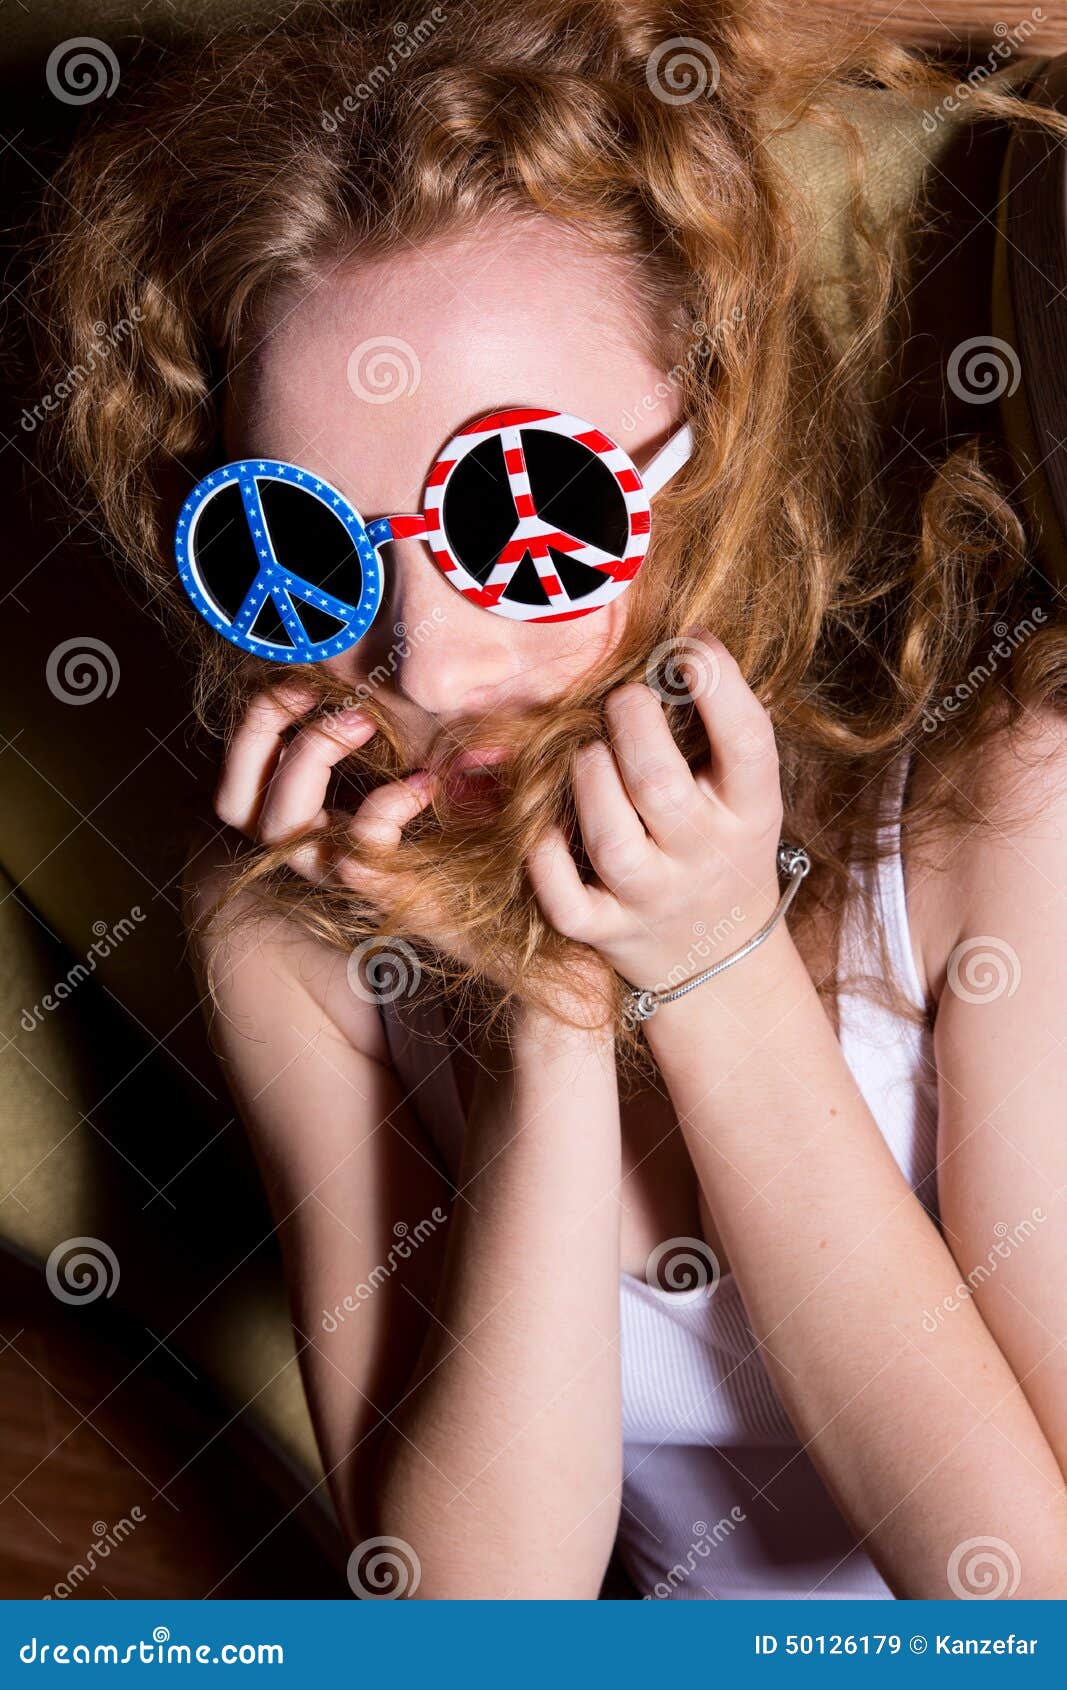 Young Girl with Curly Hair Wearing Sunglasses with the American Stock Image   Image of flag concept 50126179